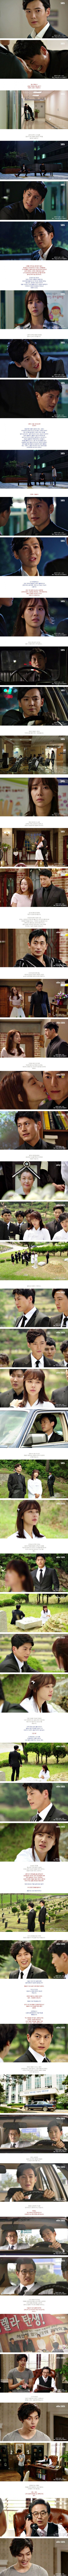 episodes 7 and 8 captures for the Korean drama 'Endless Love'